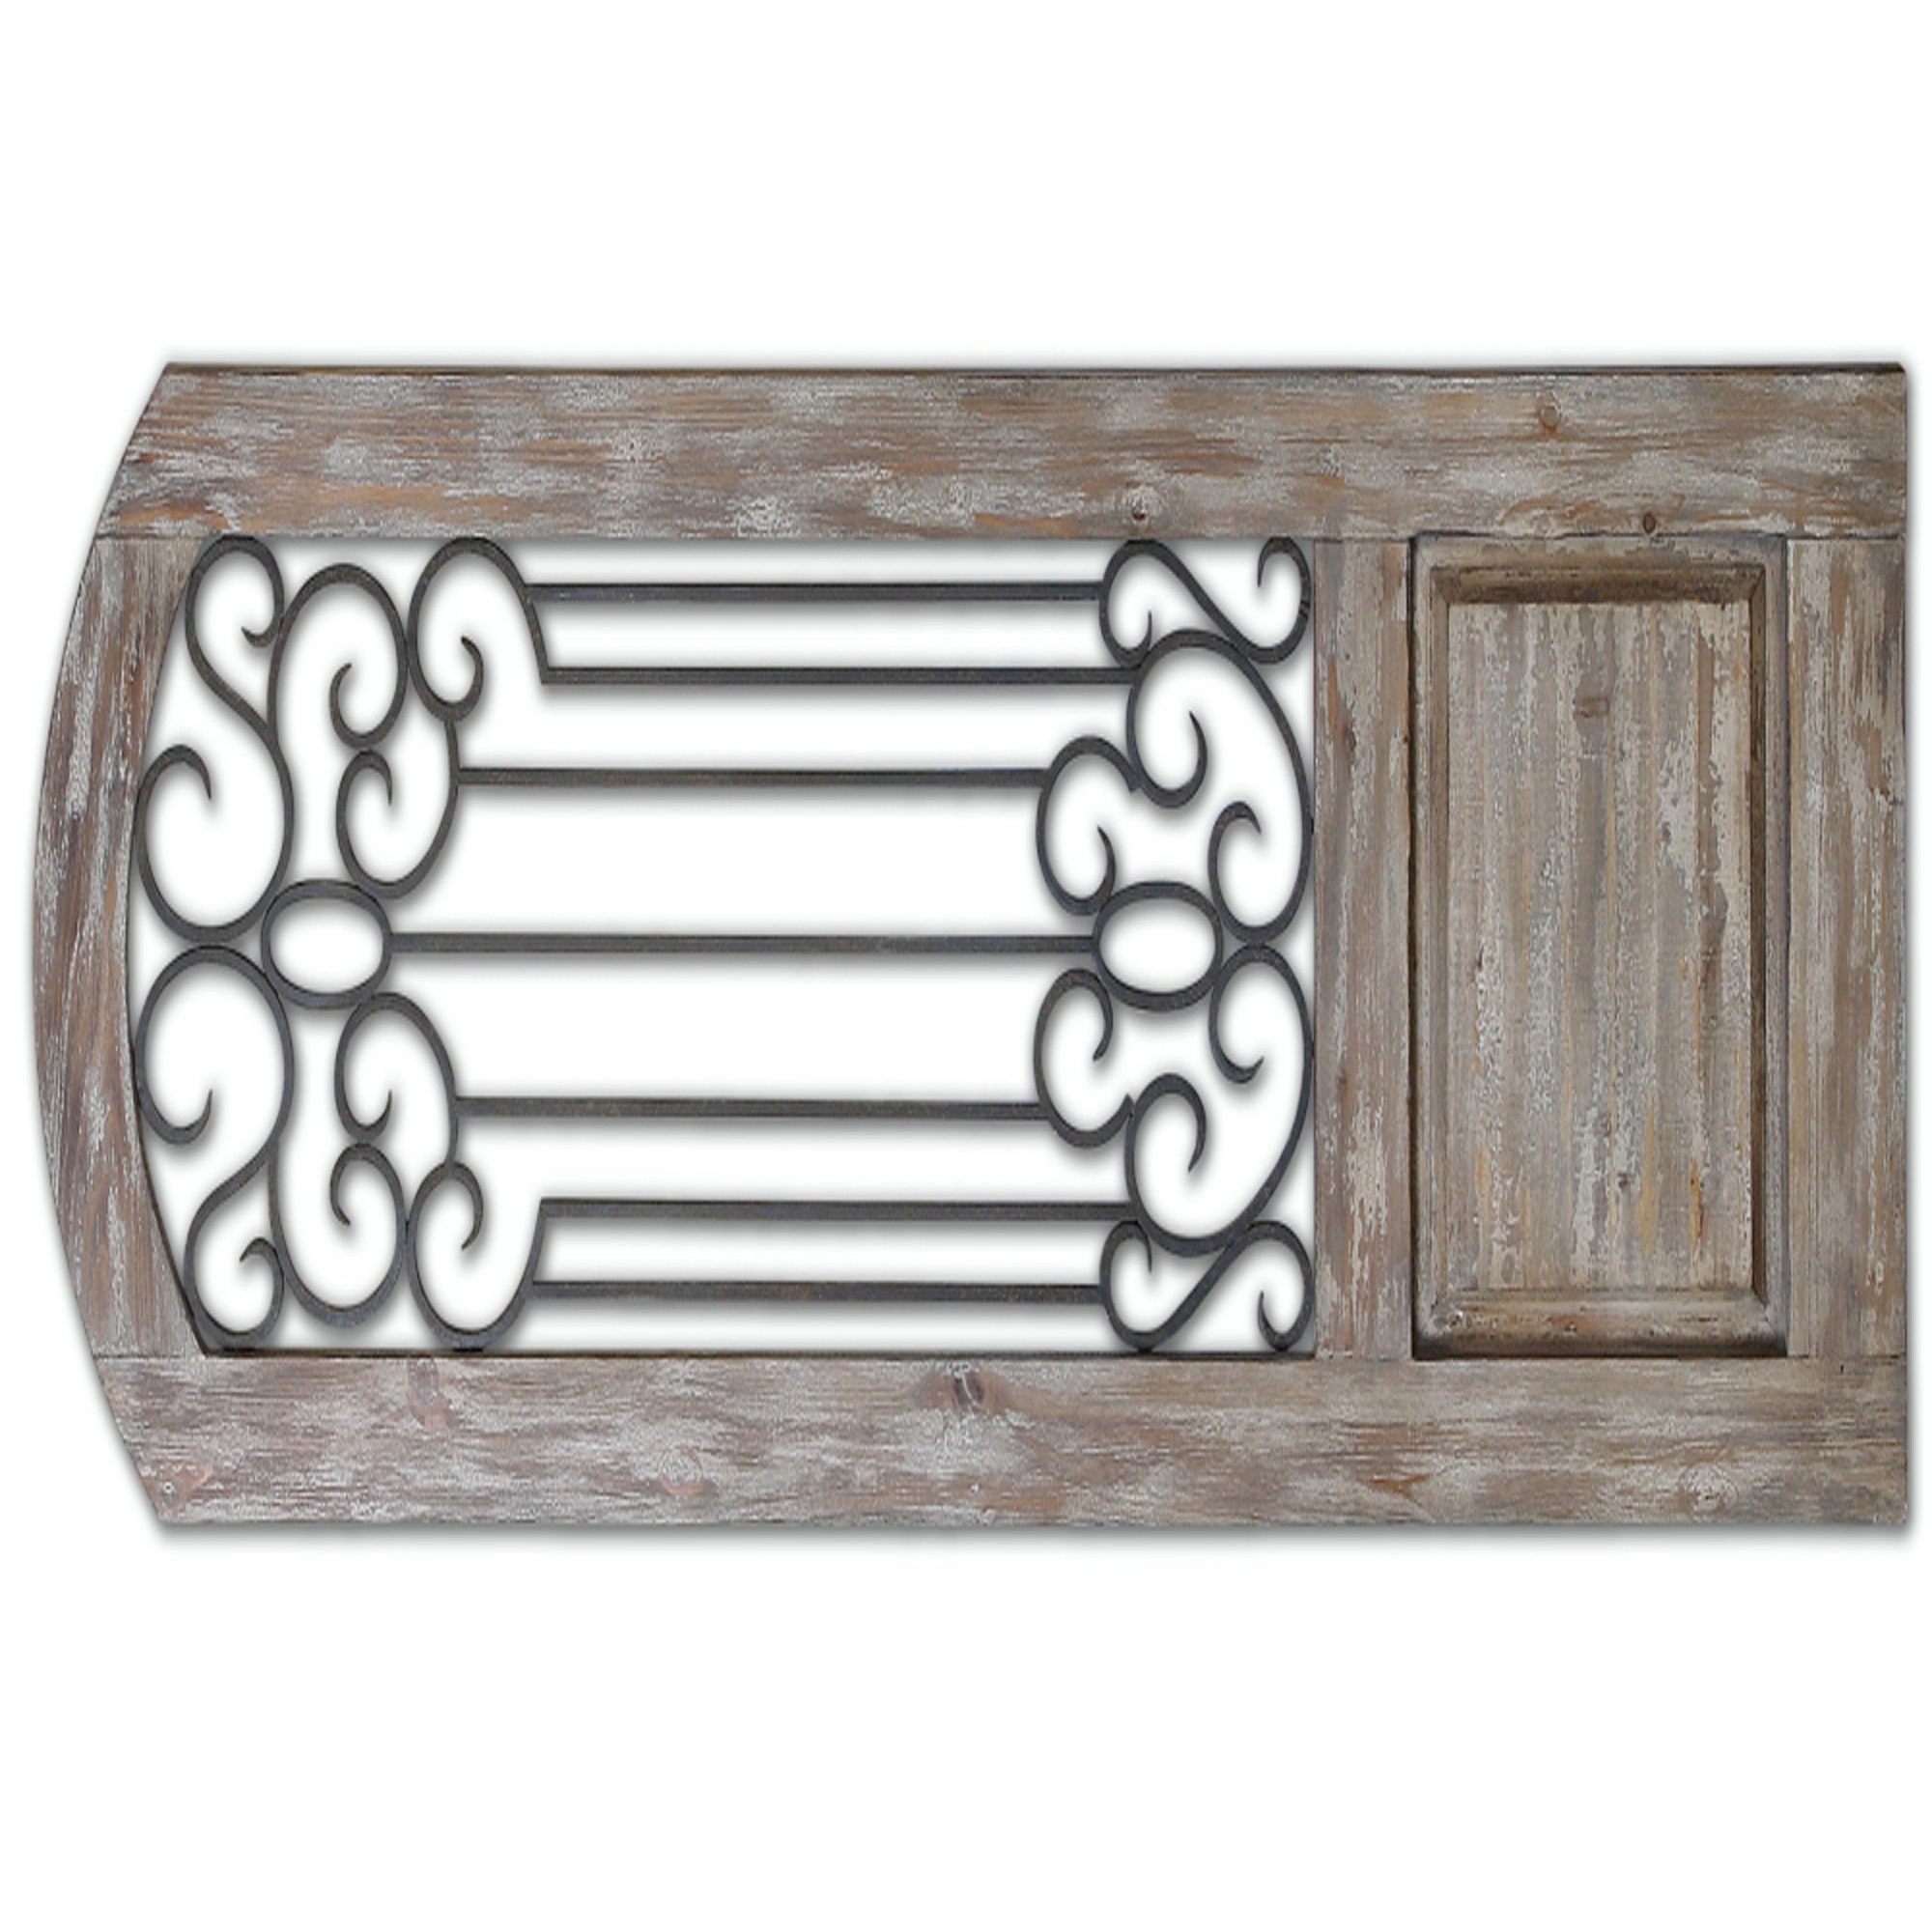 Diva At Home 6.25' Decorative Wall Decor Panel with Distressed Finish and Hand Forged Metal Details